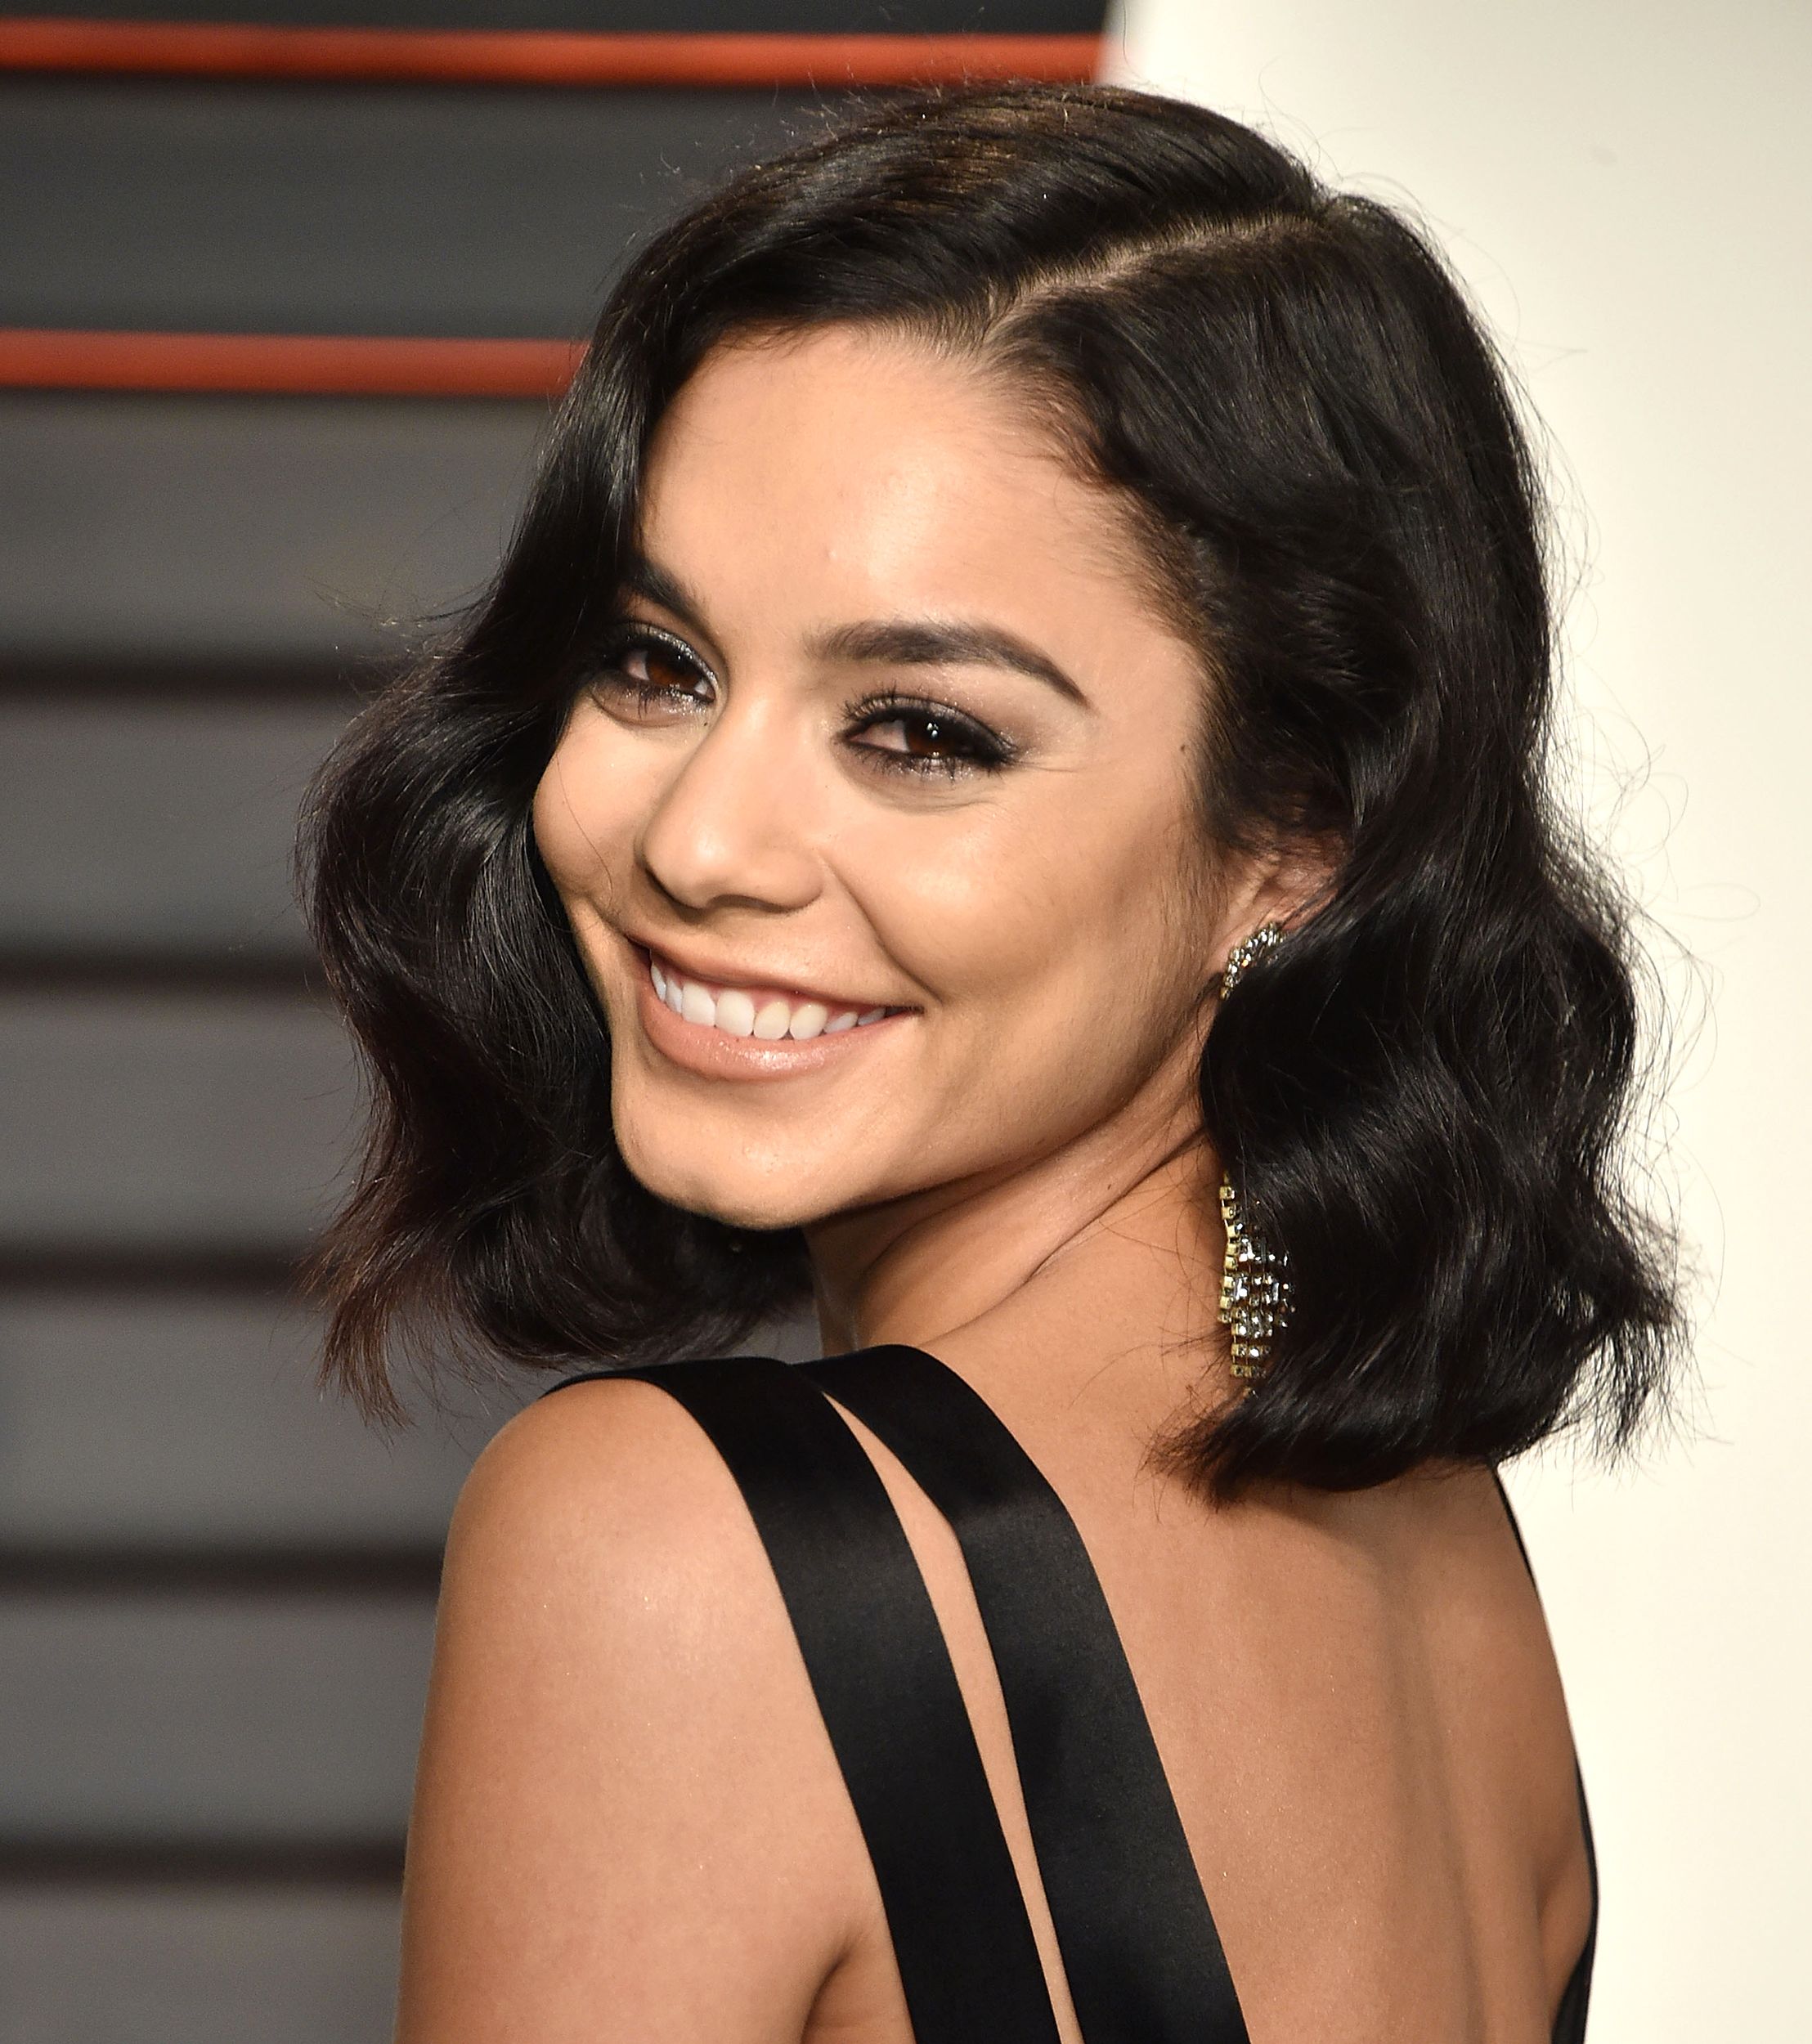 Short Hairstyles Inspiredcelebrity 'dos Throughout Vanessa Hudgens Short Hairstyles (View 5 of 25)